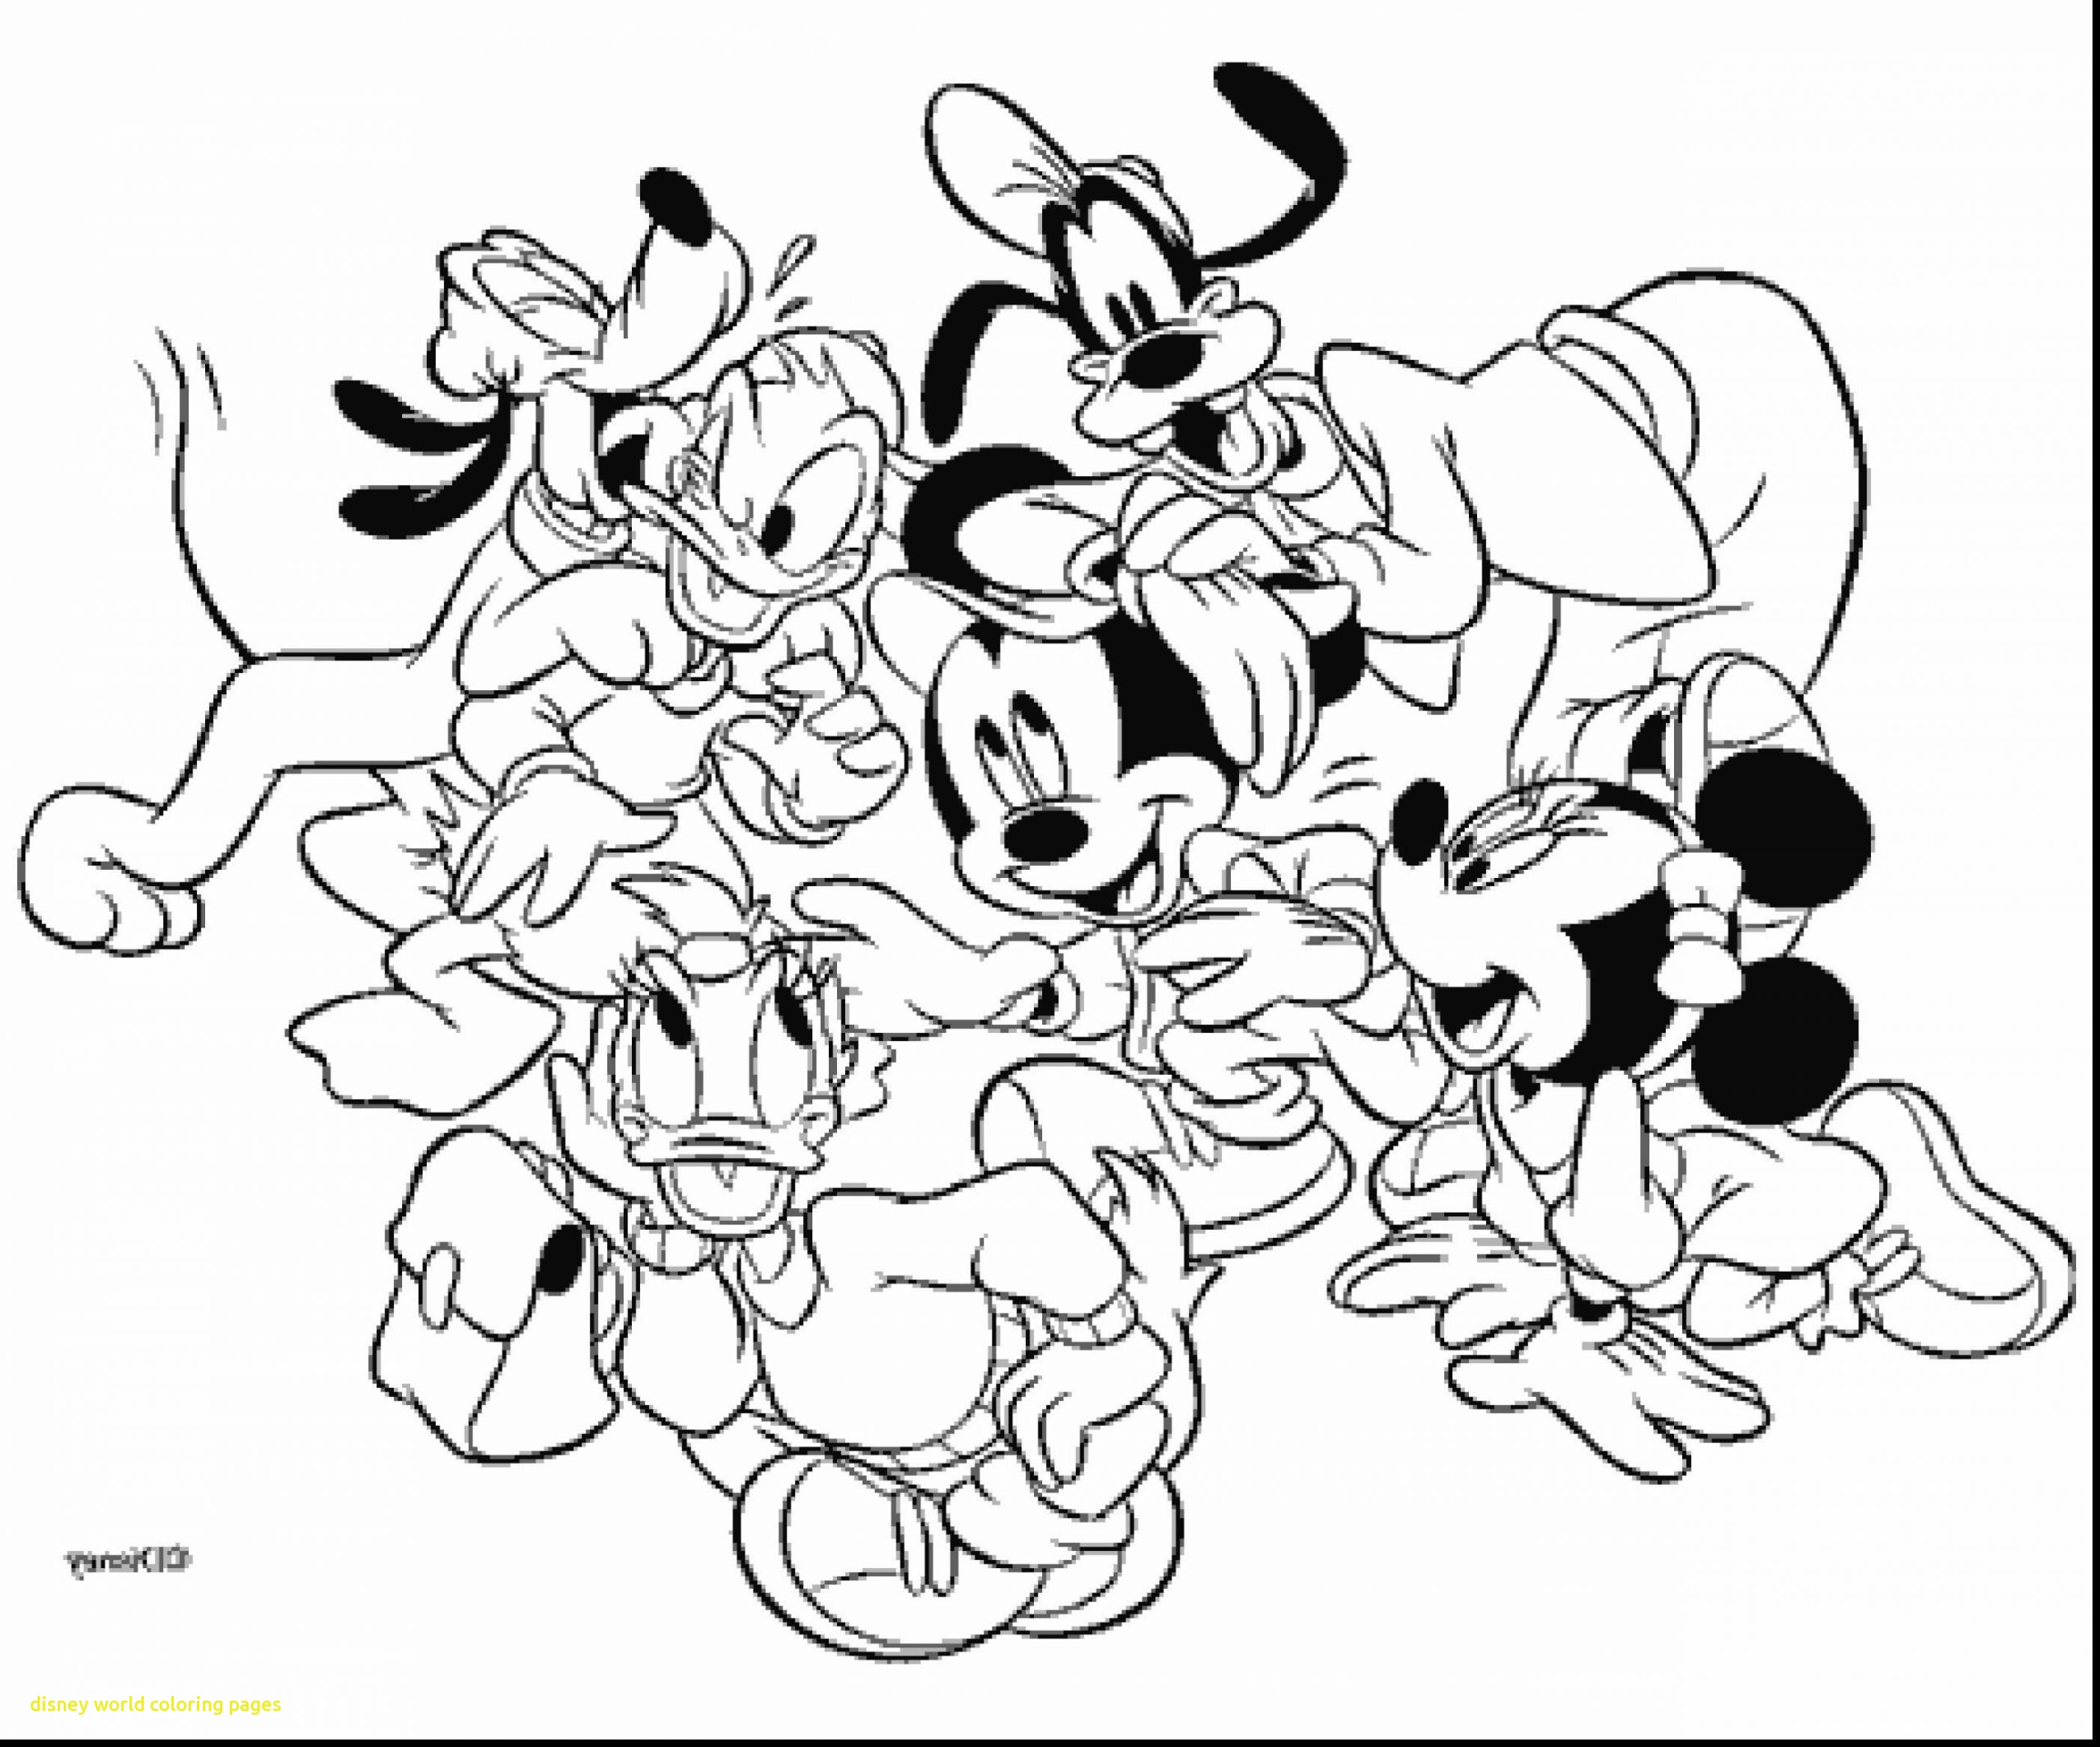 Disneyland Ride Coloring Pages - Coloring Pages for Kids